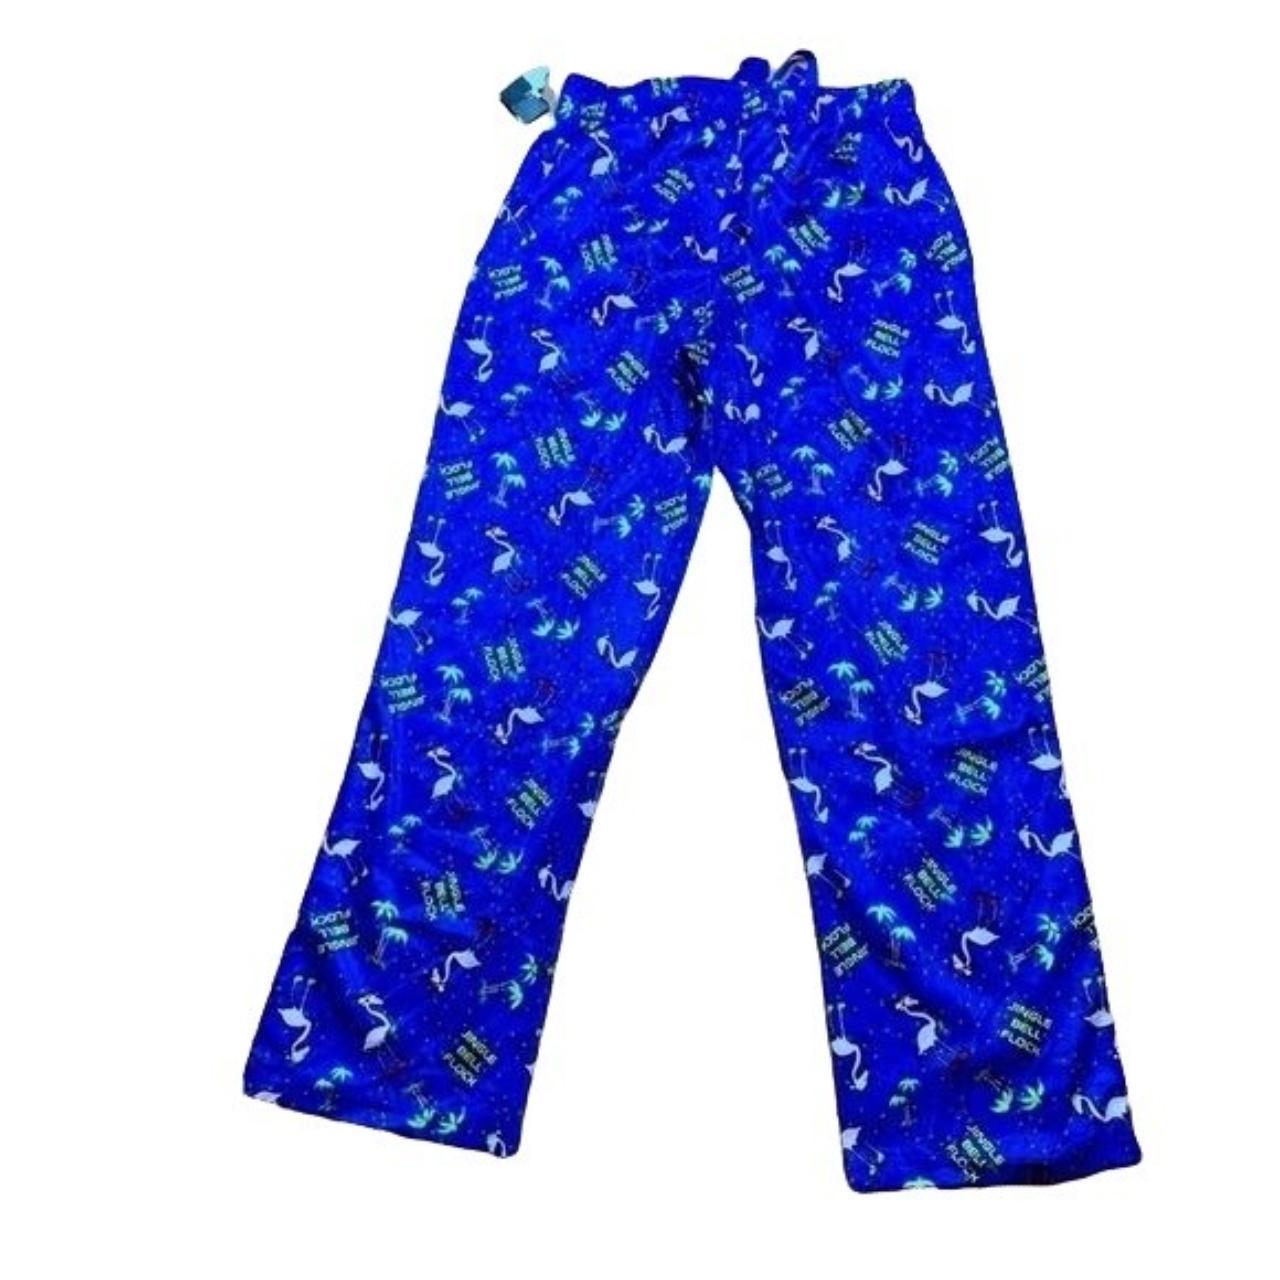 Hawke & Co. Men's Blue and Pink Pajamas (2)